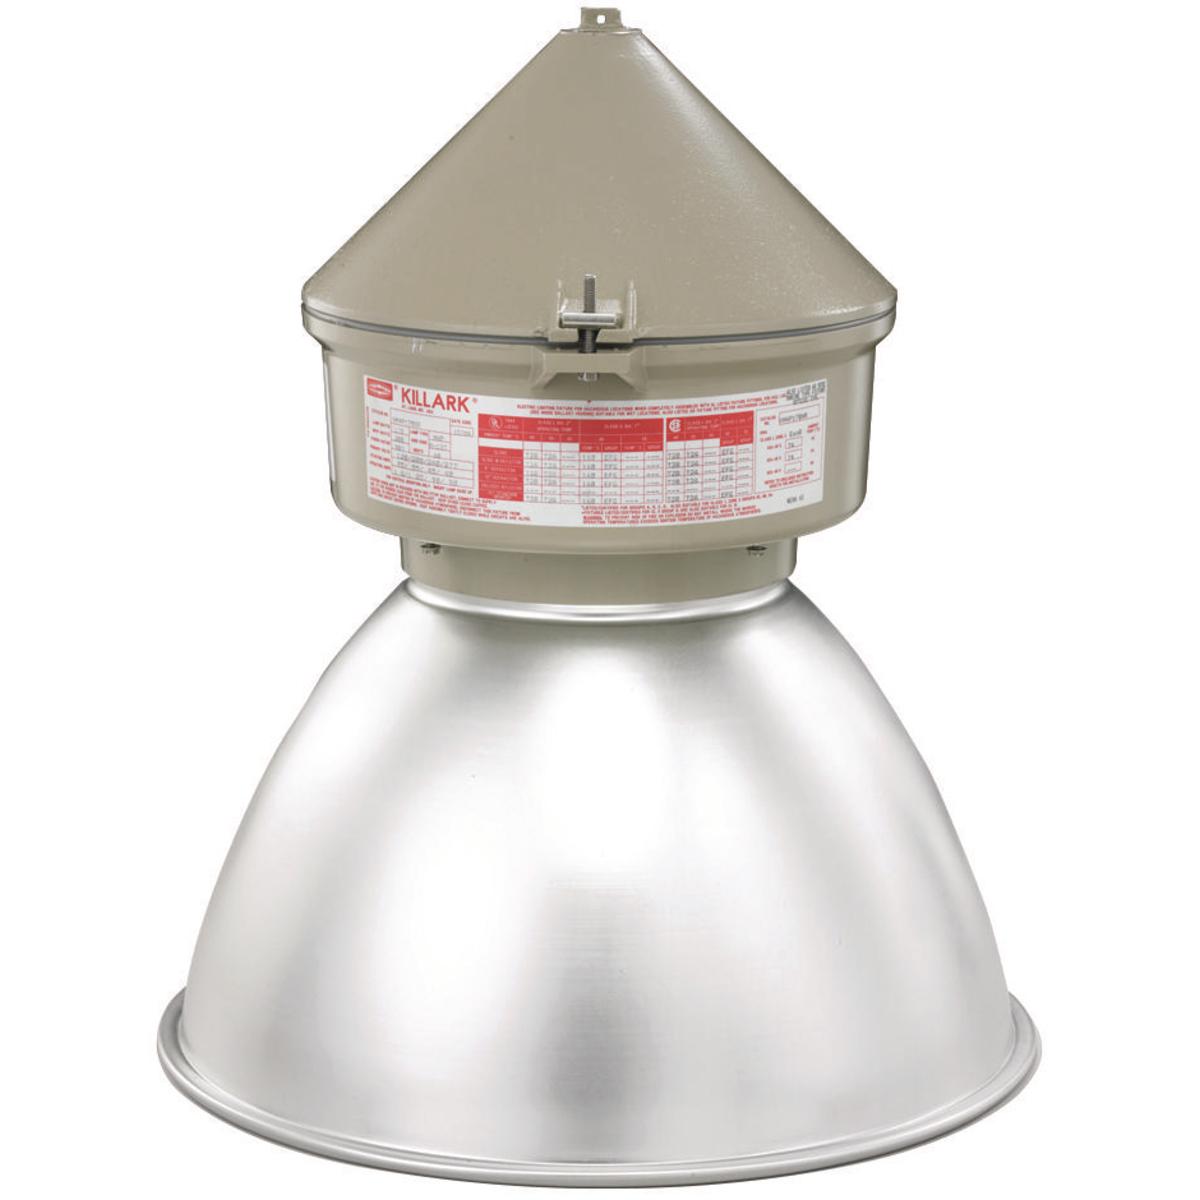 Hubbell VM4P150C2ERN VM4 Series - 150W Metal Halide Quadri-Volt - 3/4" Cone Top - Enclosed Reflector  ; Ballast tank and splice box – corrosion resistant copper-free aluminum alloy with baked powder epoxy/polyester finish, electrostatically applied for complete, uniform corro